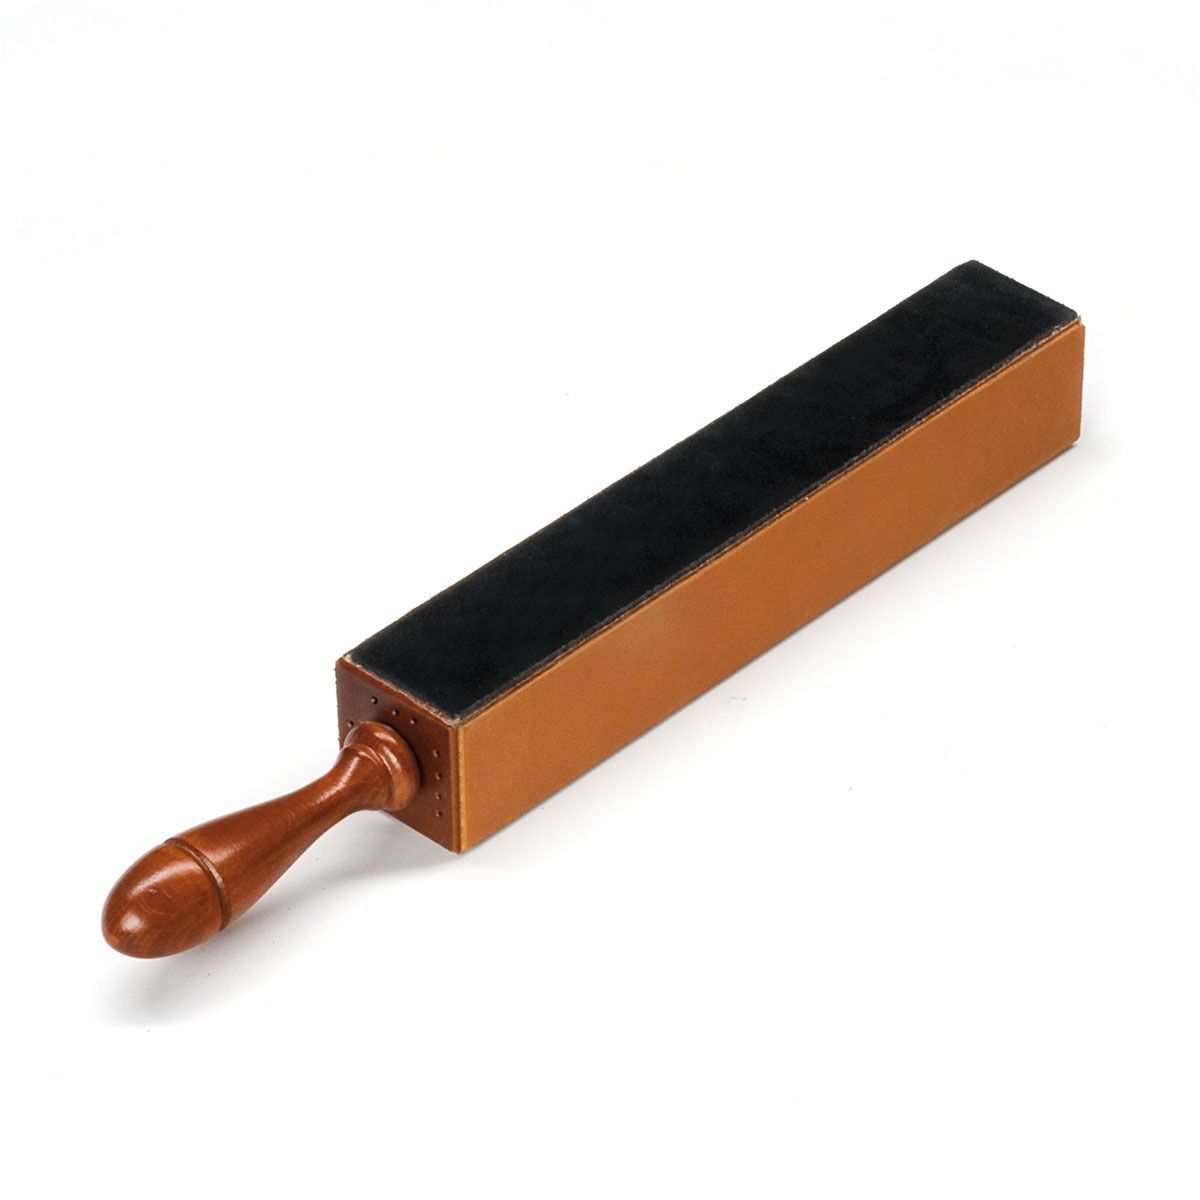 Razors accessories 4 Sided Paddle Strop